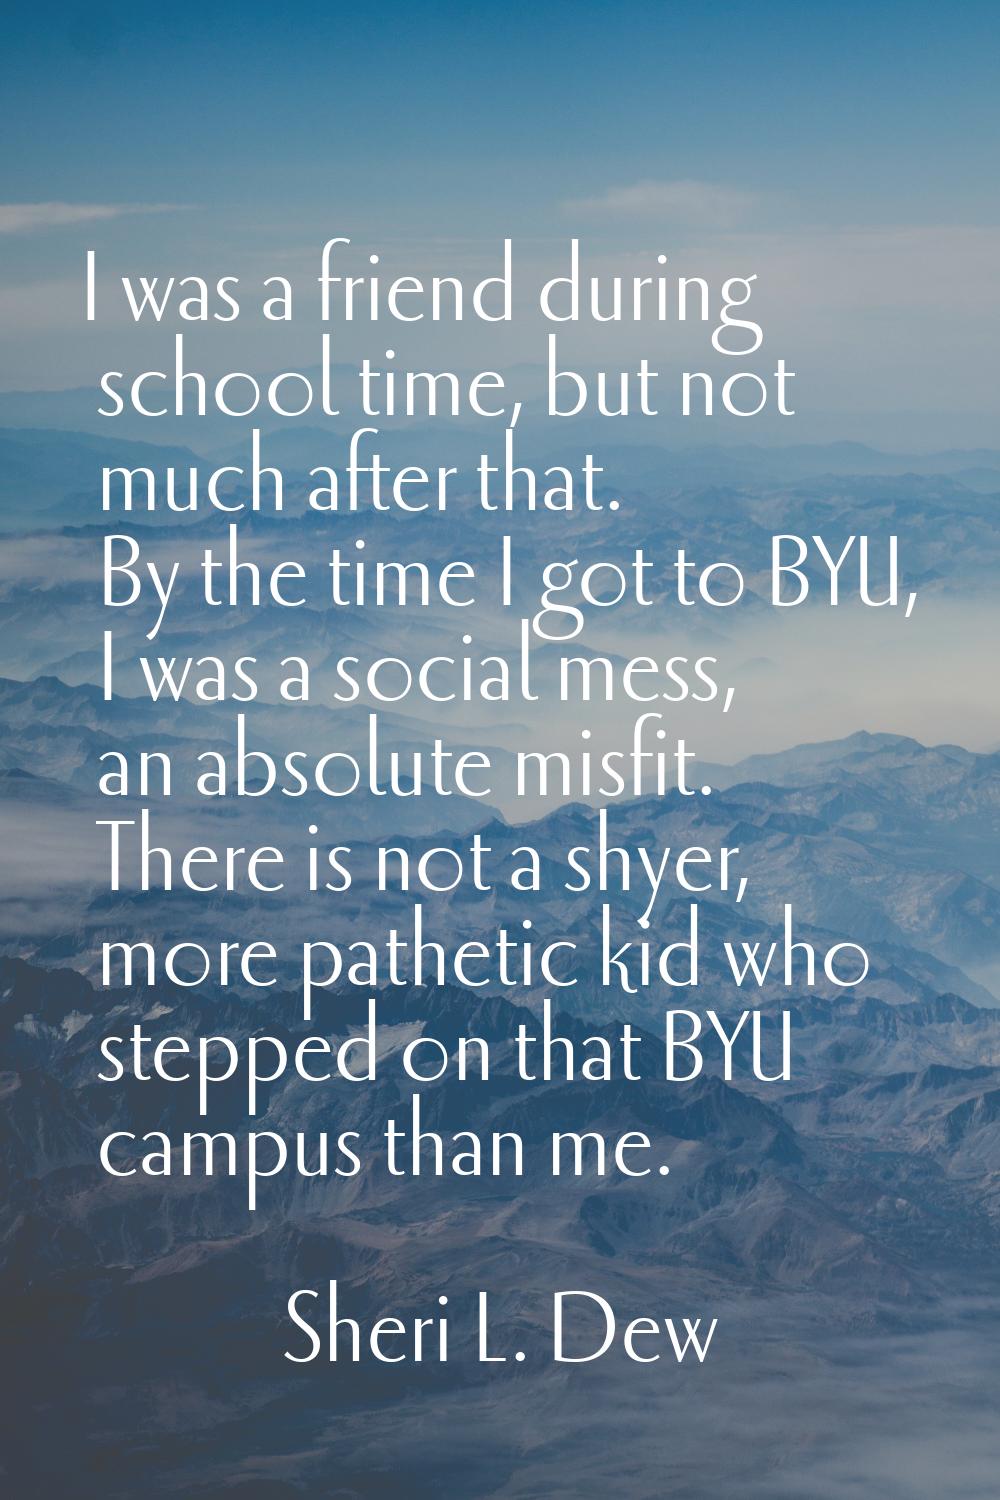 I was a friend during school time, but not much after that. By the time I got to BYU, I was a socia